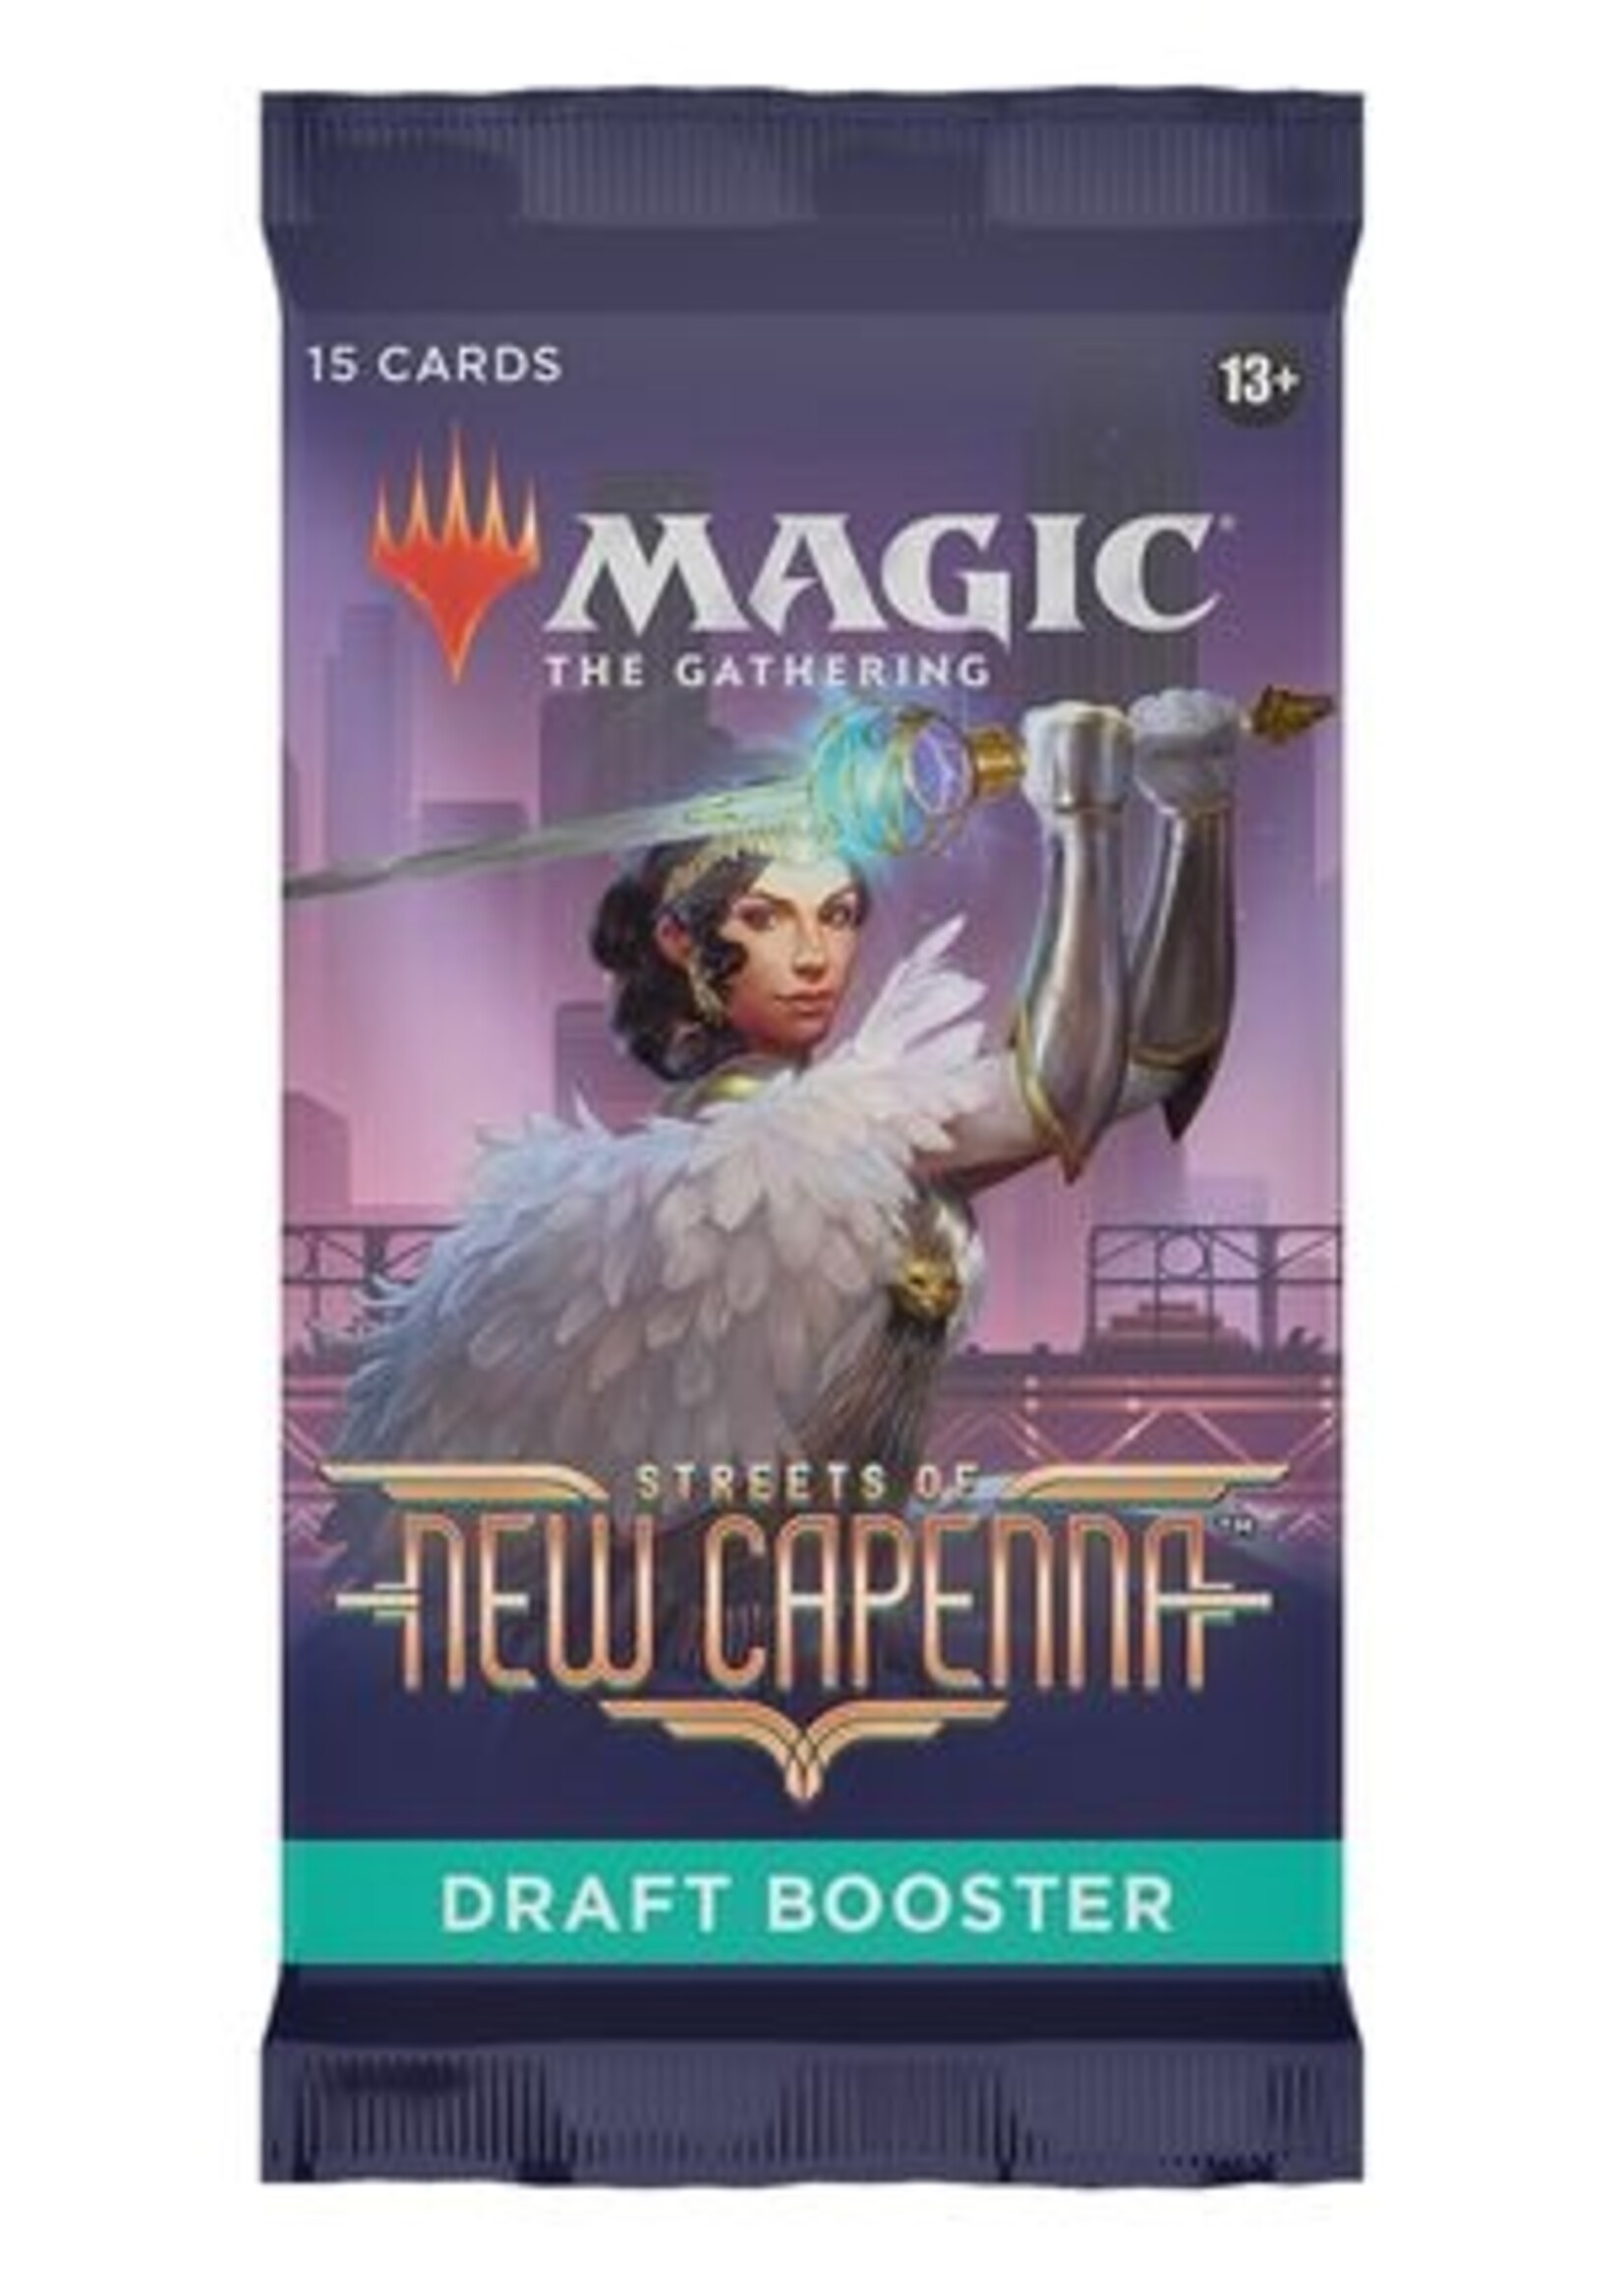 Wizards of the Coast - "Streets of New Capenna" Draft Booster